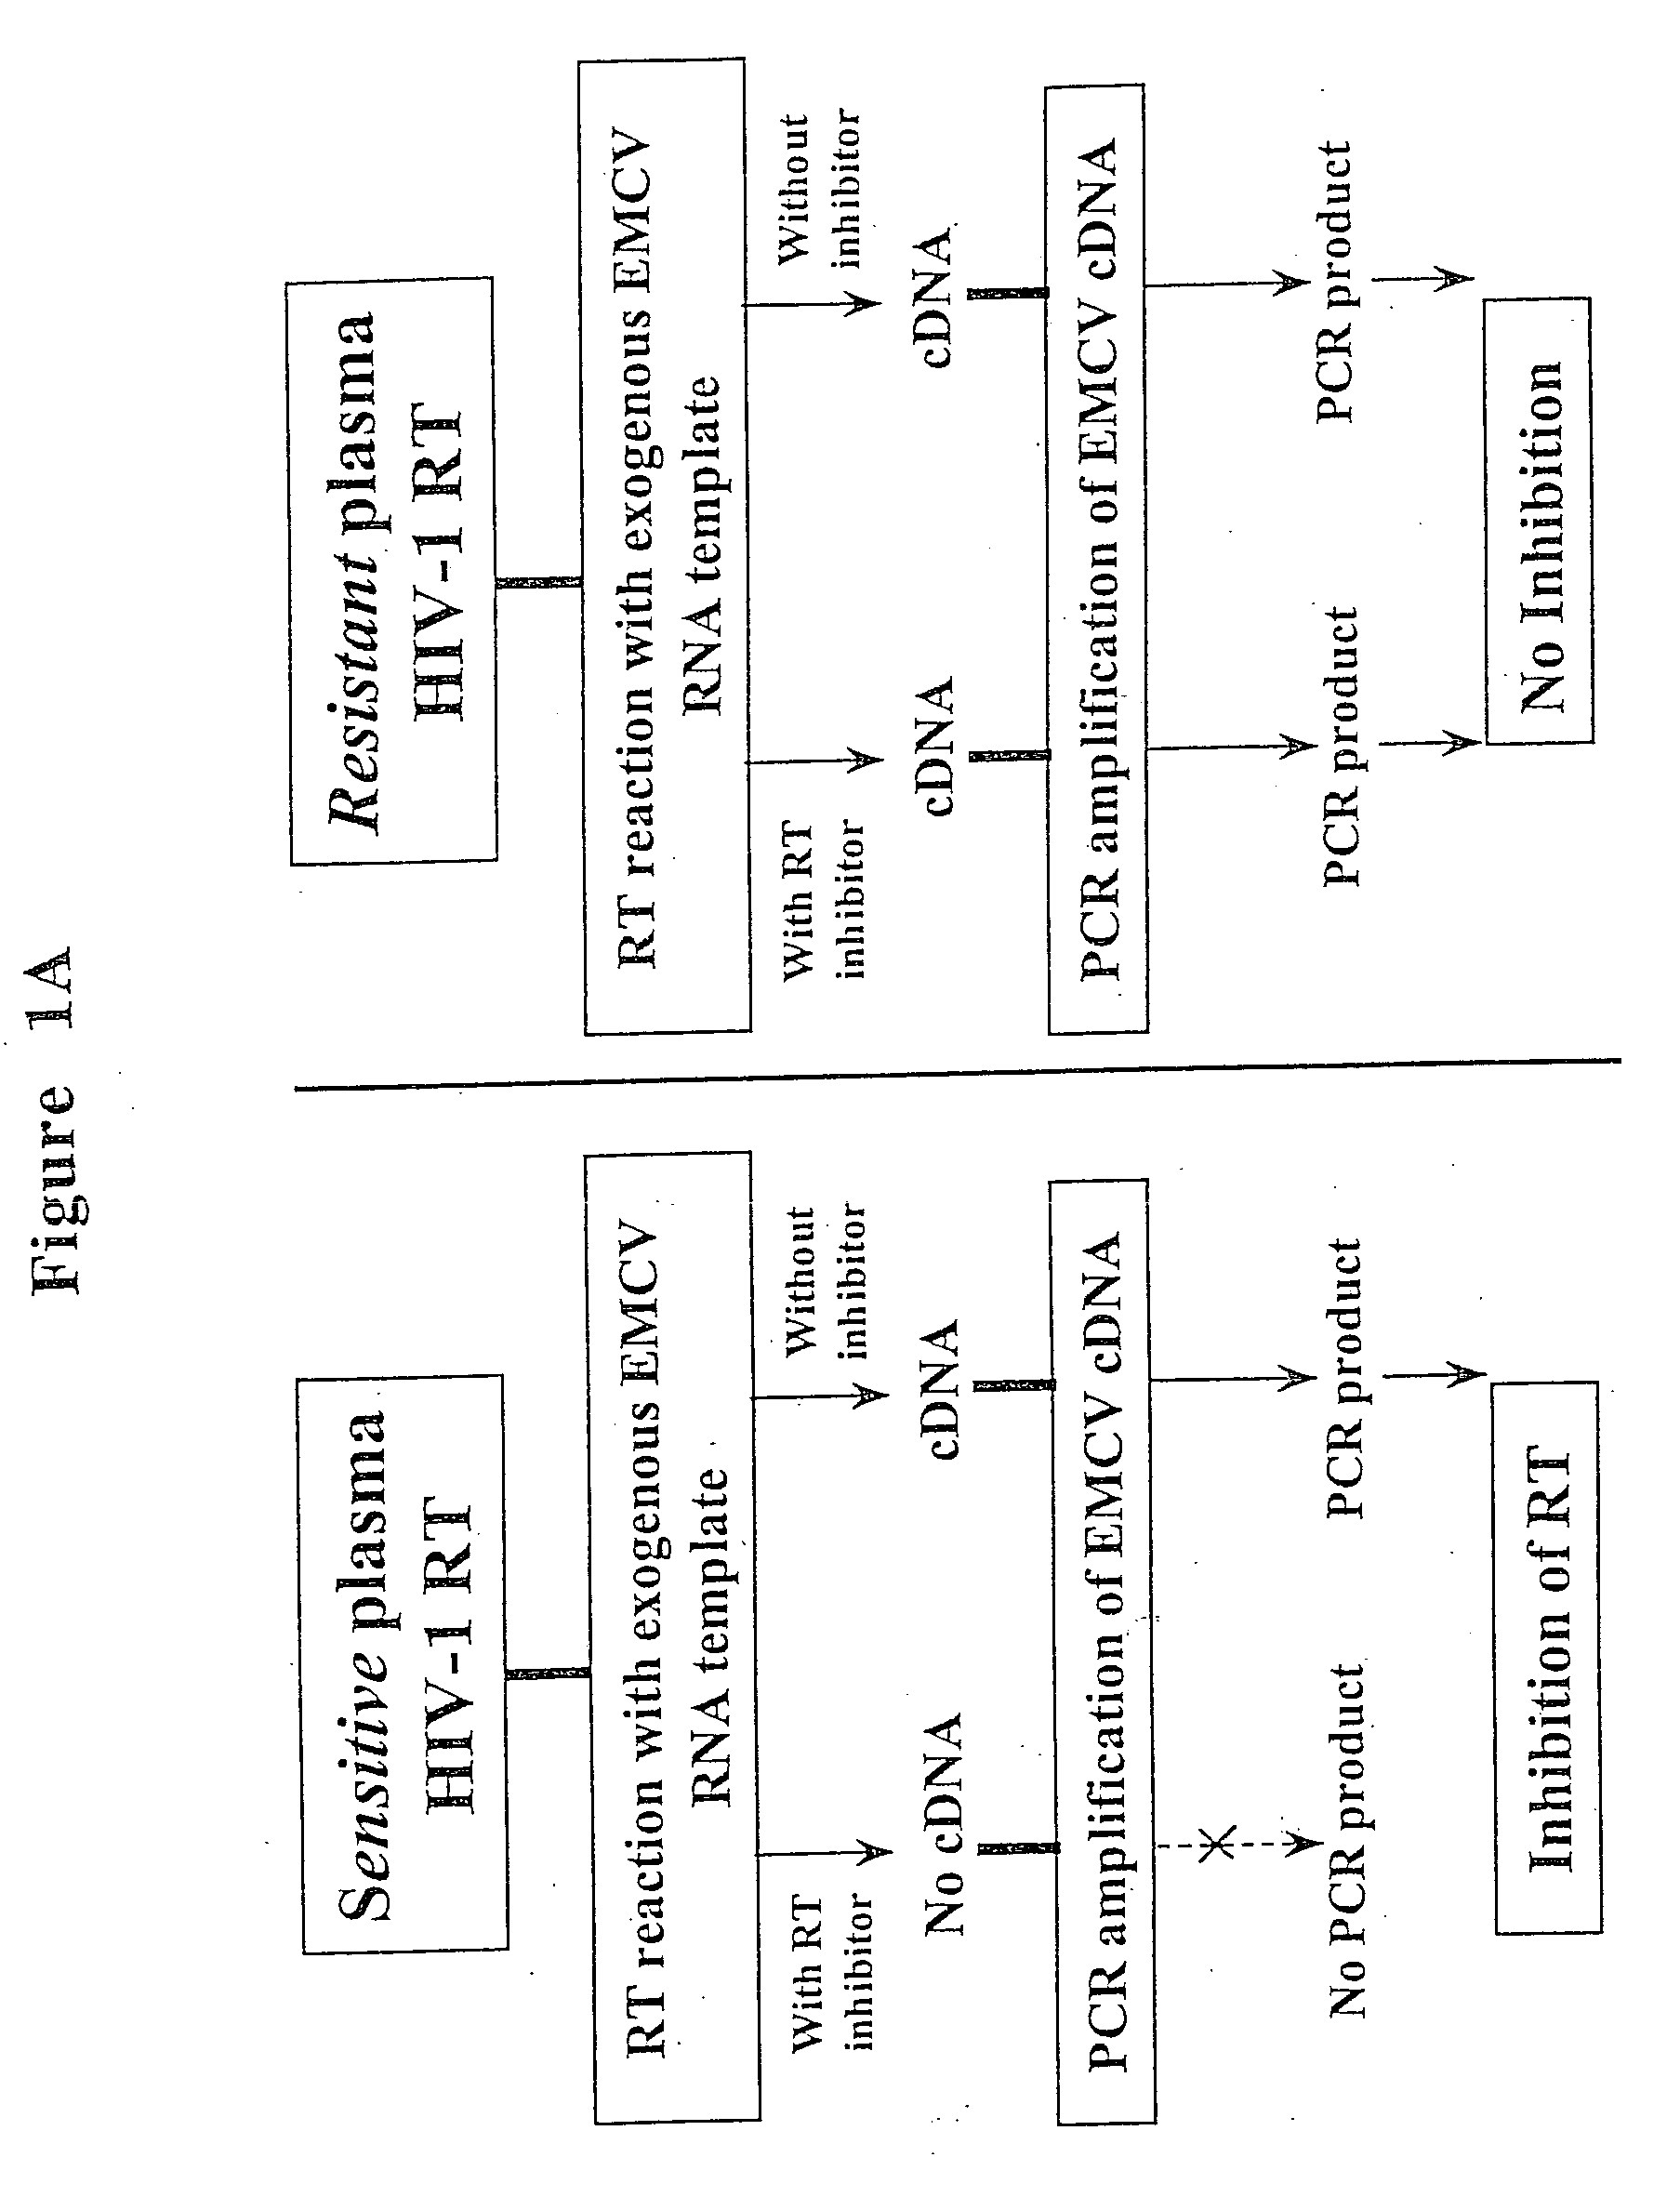 Method and kit for detecting resistance to anitviral drugs